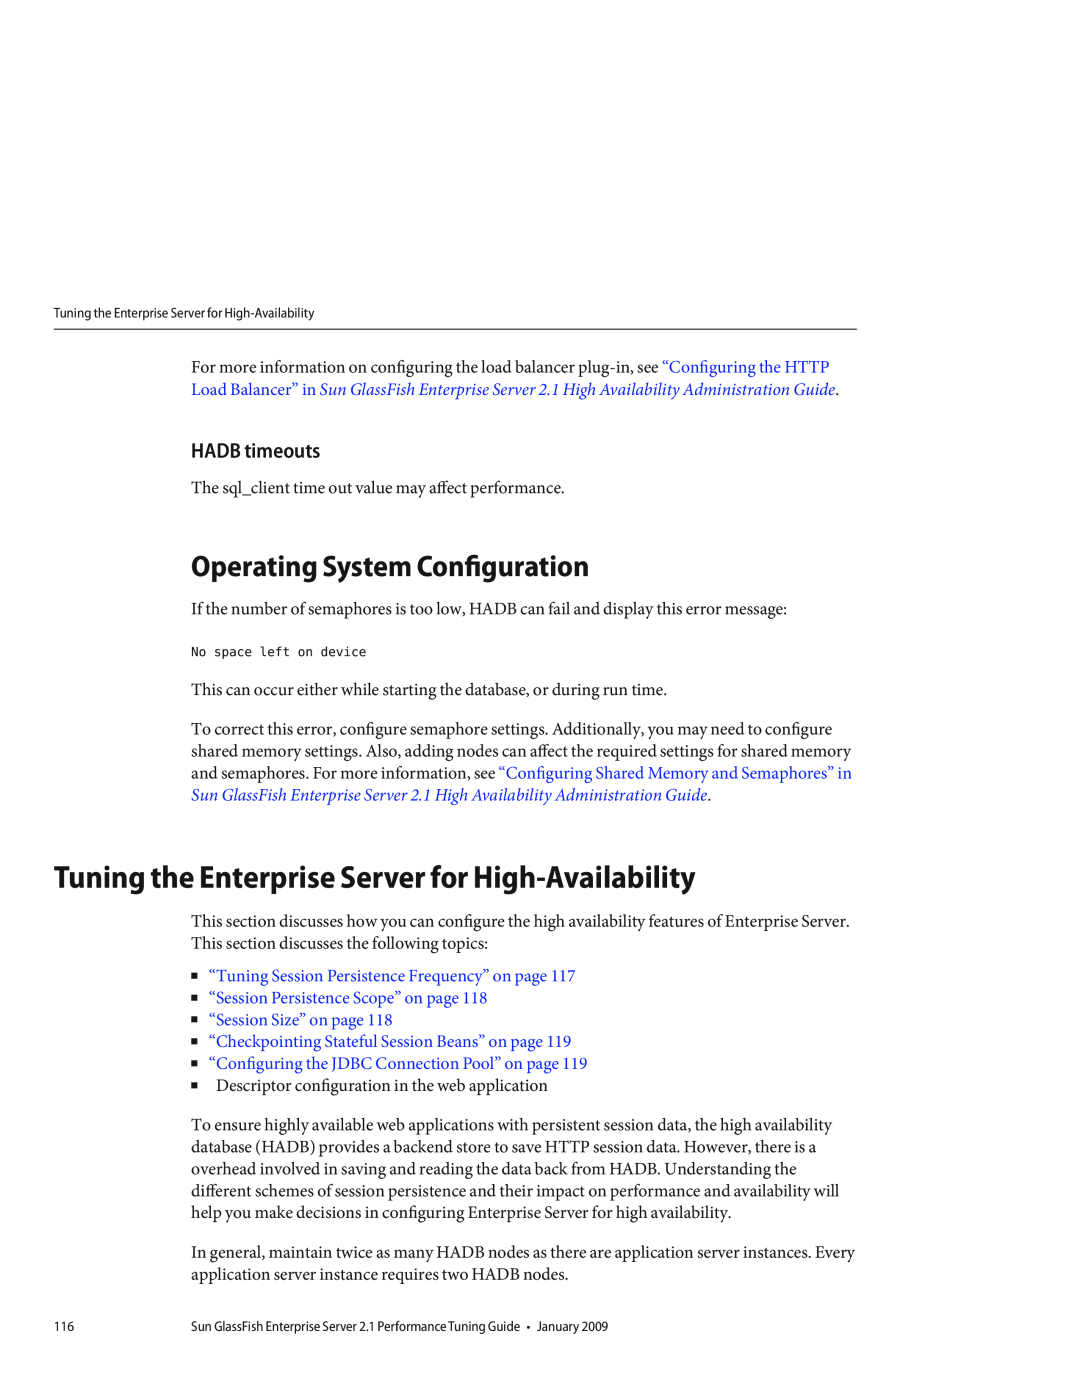 Sun Microsystems 820434310 manual Tuning the Enterprise Server for High-Availability, Operating System Configuration 